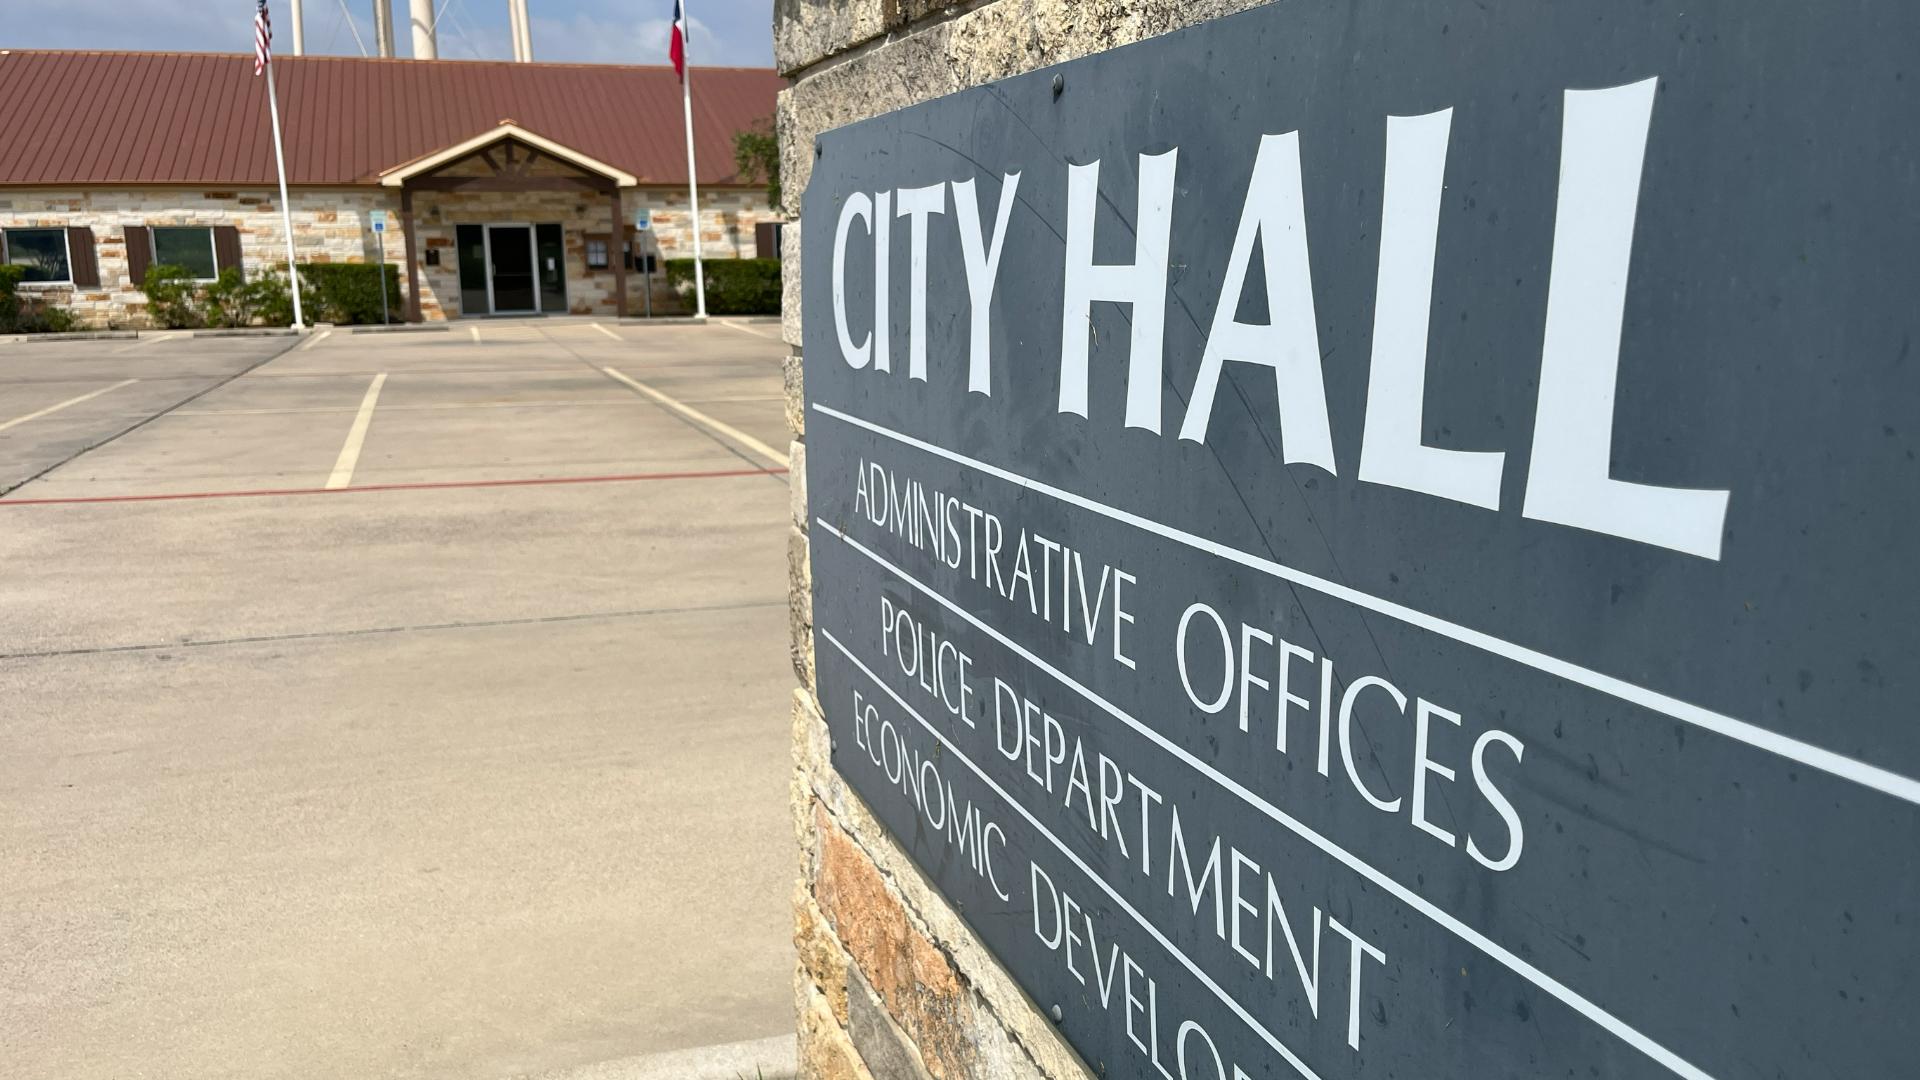 Things got heated at Jarrell City Hall on Tuesday as city council and community members gathered to address a complaint against certain councilmen.